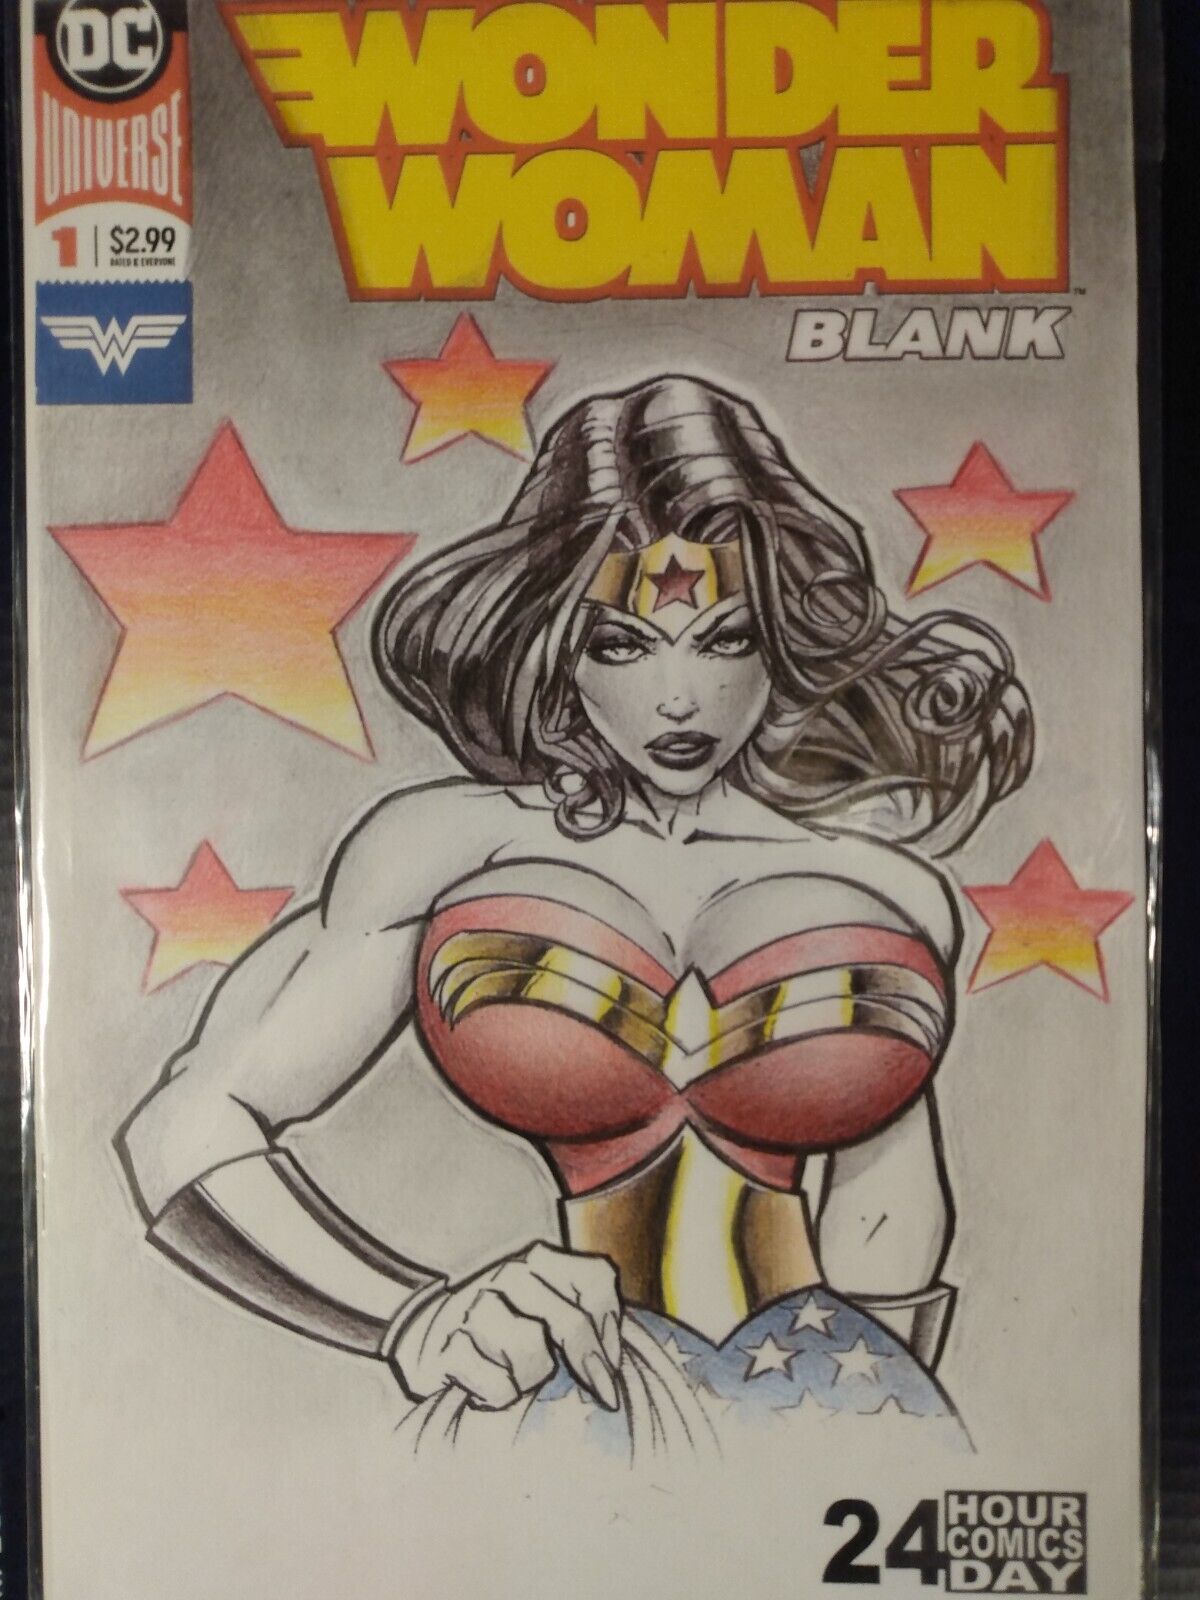 WONDER WOMAN ORIGINAL SKETCH COVER ART DRAWING BY ANDRADE NOT A PRINT